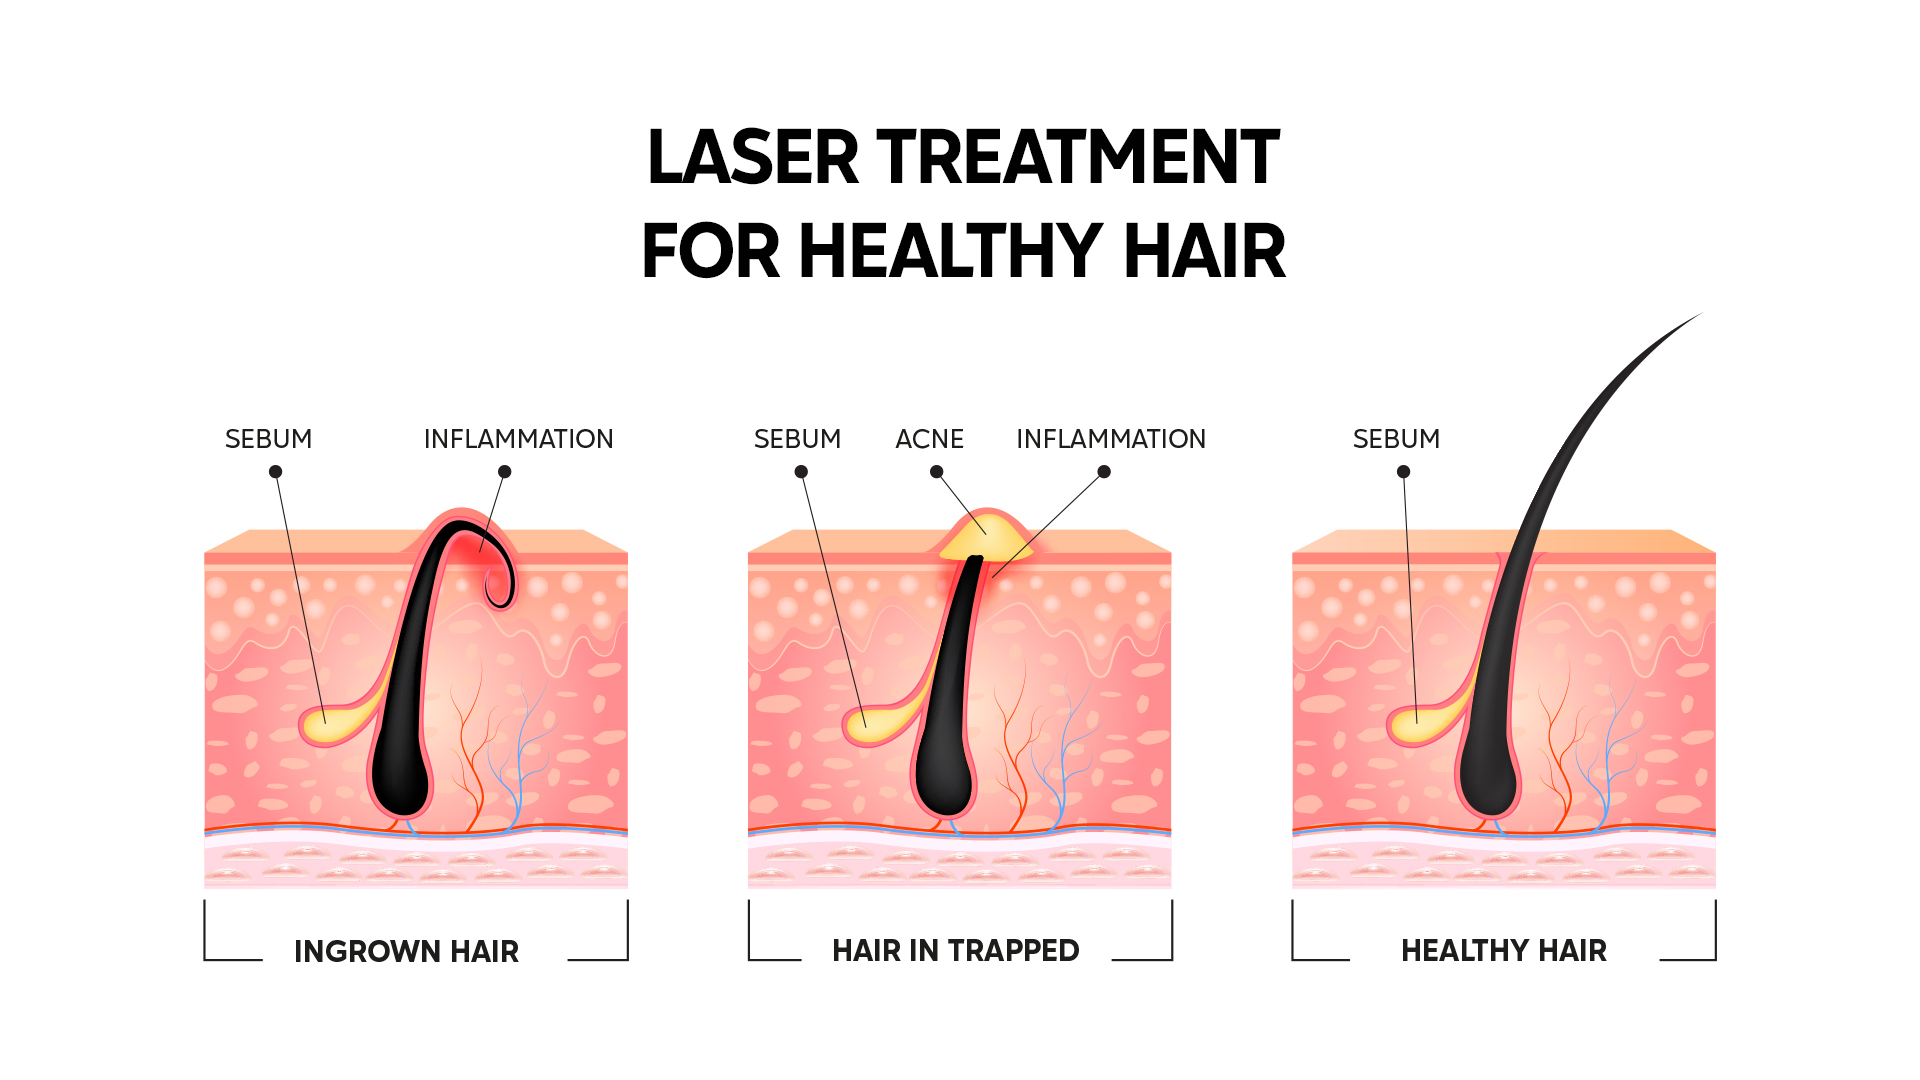 How laser treatment helps